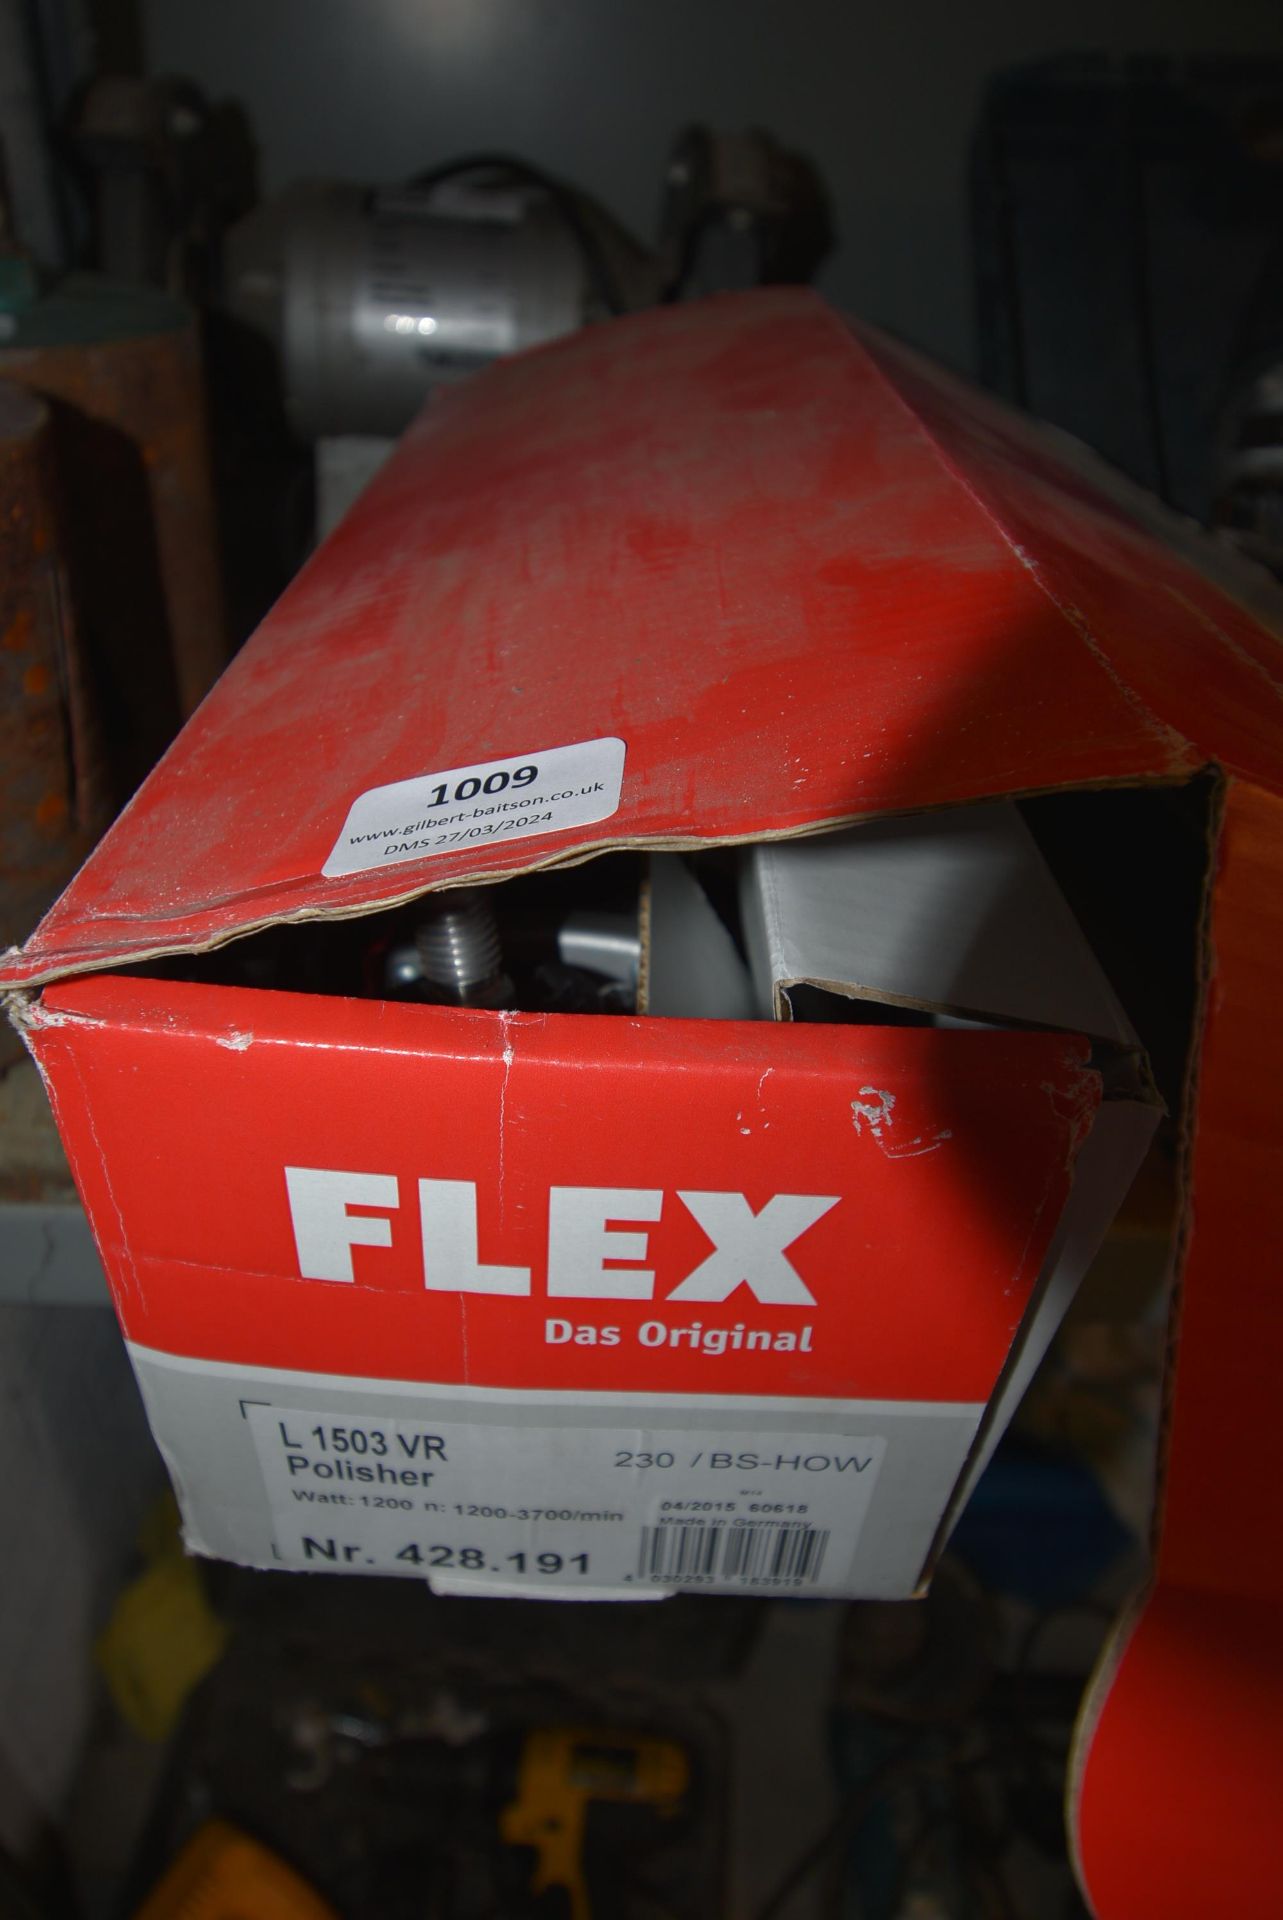 *Flex L1503VR 240v Polisher (new & boxed) (Location: 64 King Edward St, Grimsby, DN31 3JP, Viewing